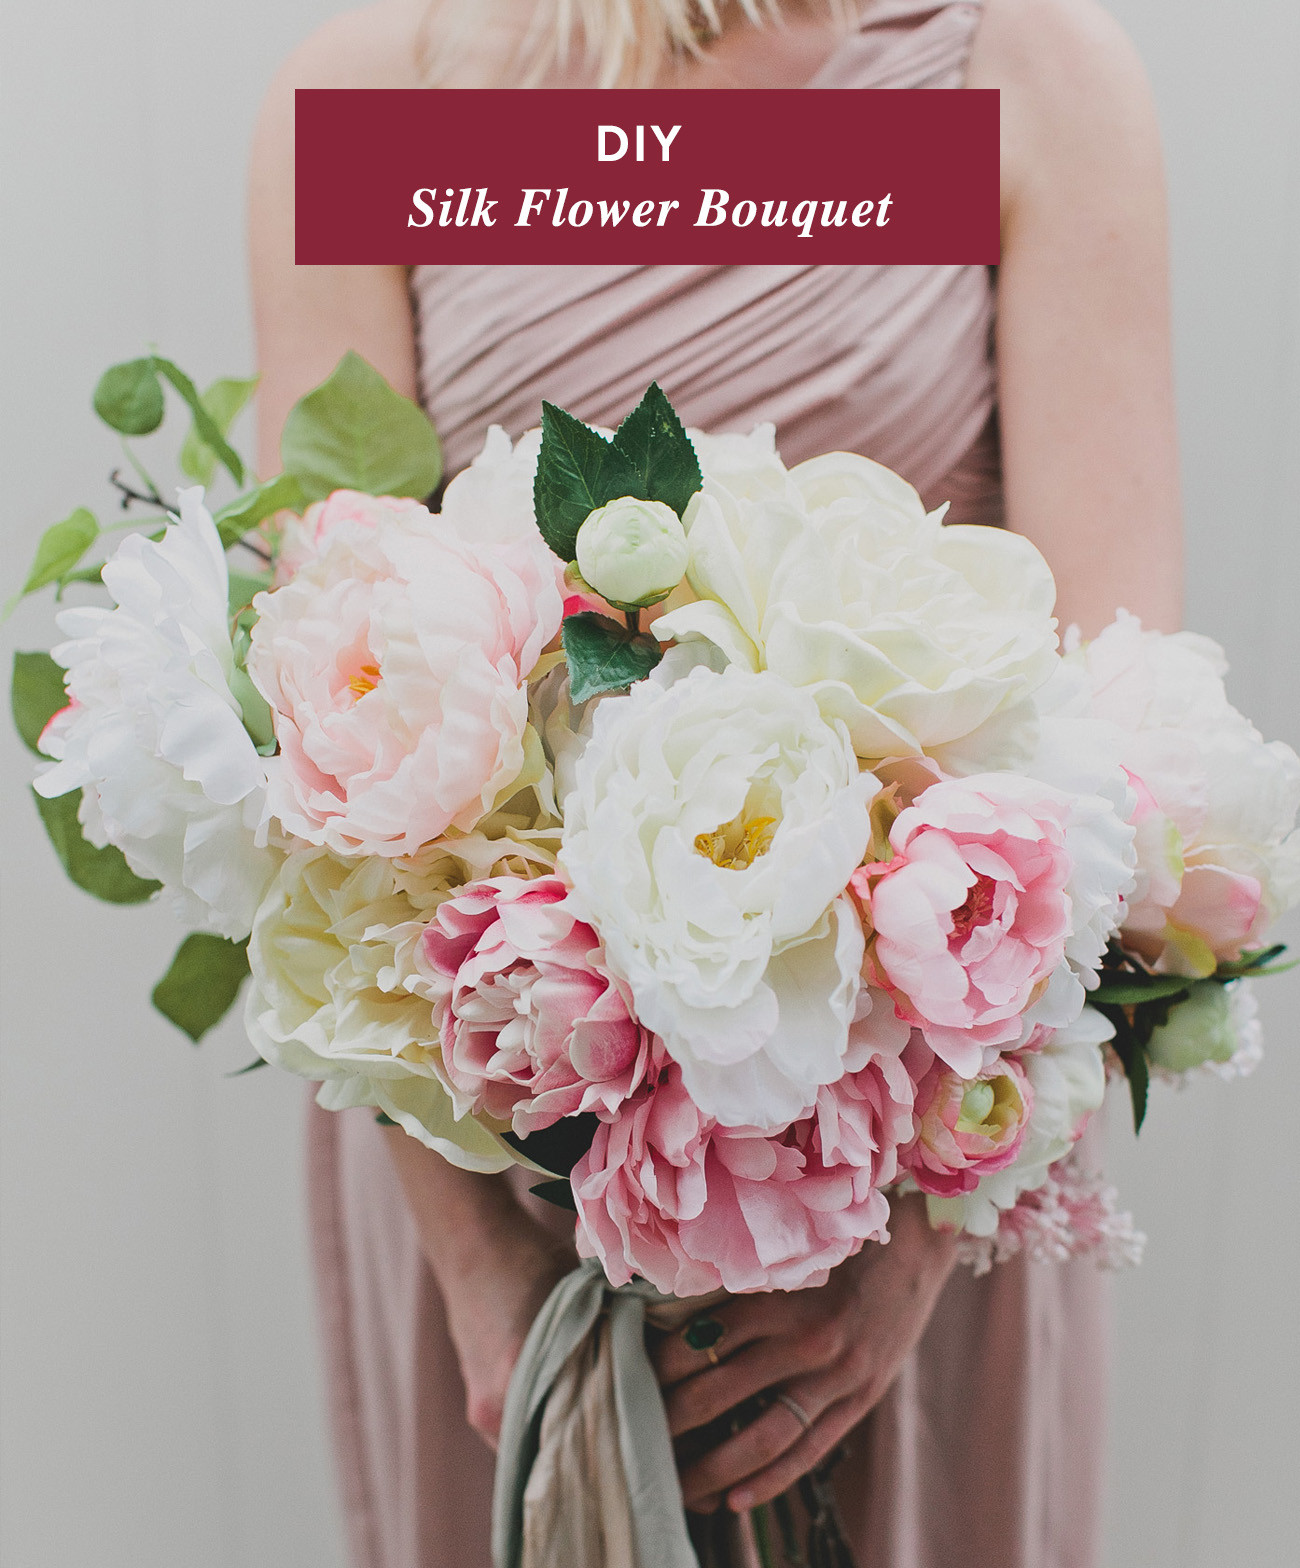 Best ideas about DIY Flower Bouquet
. Save or Pin DIY Silk Flower Bouquet with Afloral Green Wedding Shoes Now.